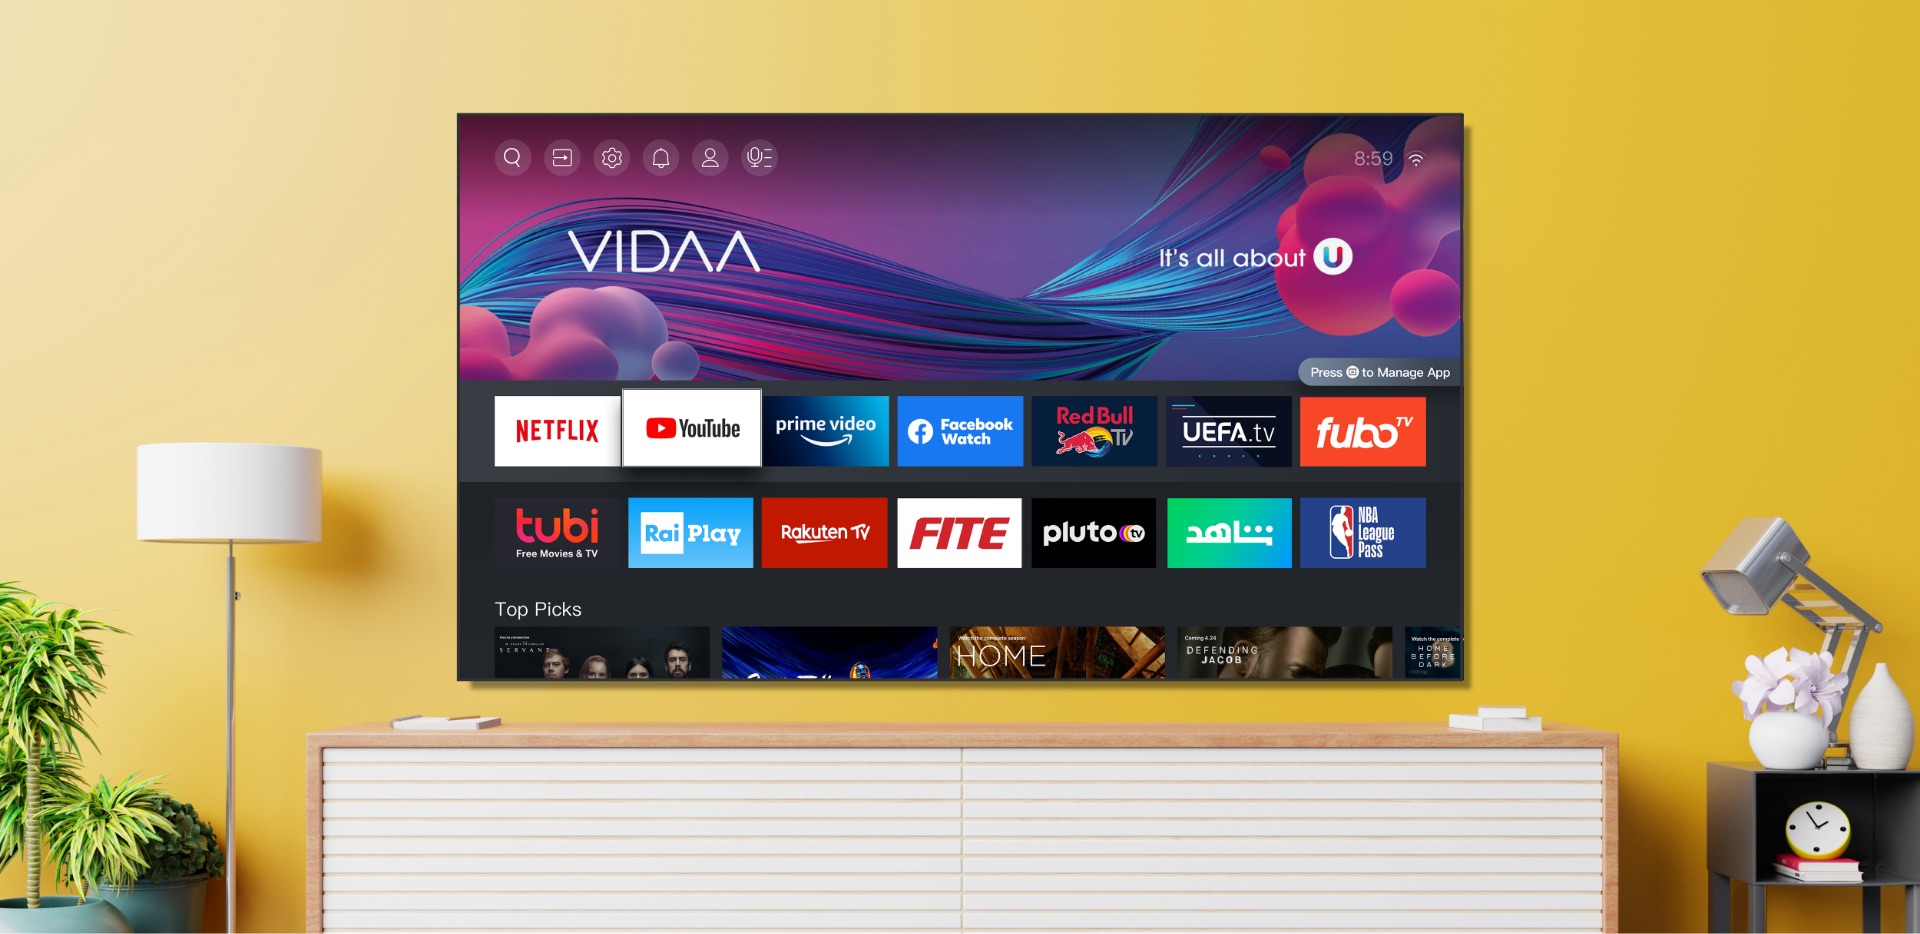 Visual depiction of the VIDAA smart system interface on the Hisense A4G Series Smart FHD TV, showcasing a range of applications and seamless navigation.